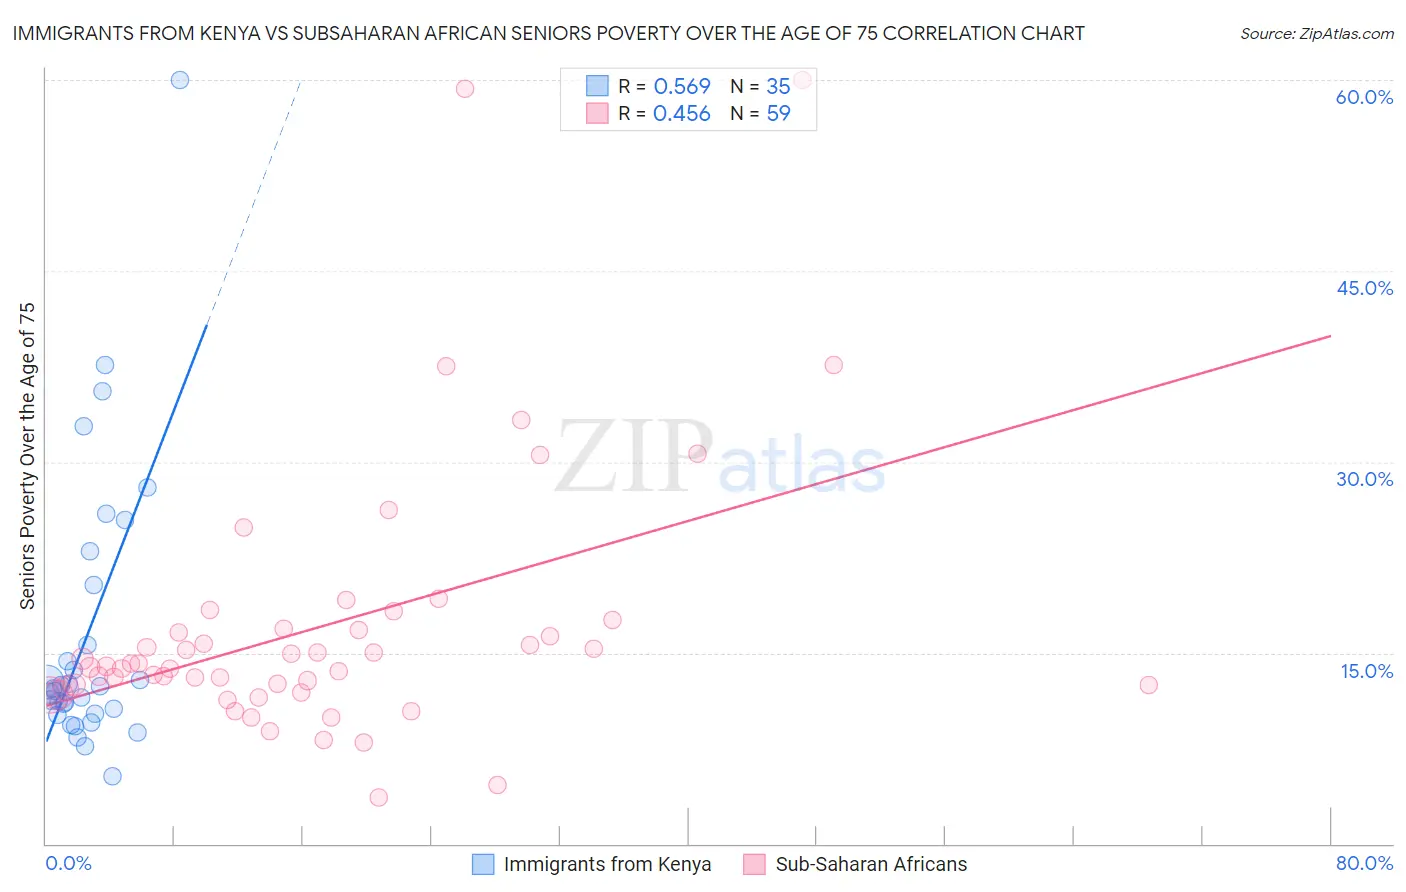 Immigrants from Kenya vs Subsaharan African Seniors Poverty Over the Age of 75